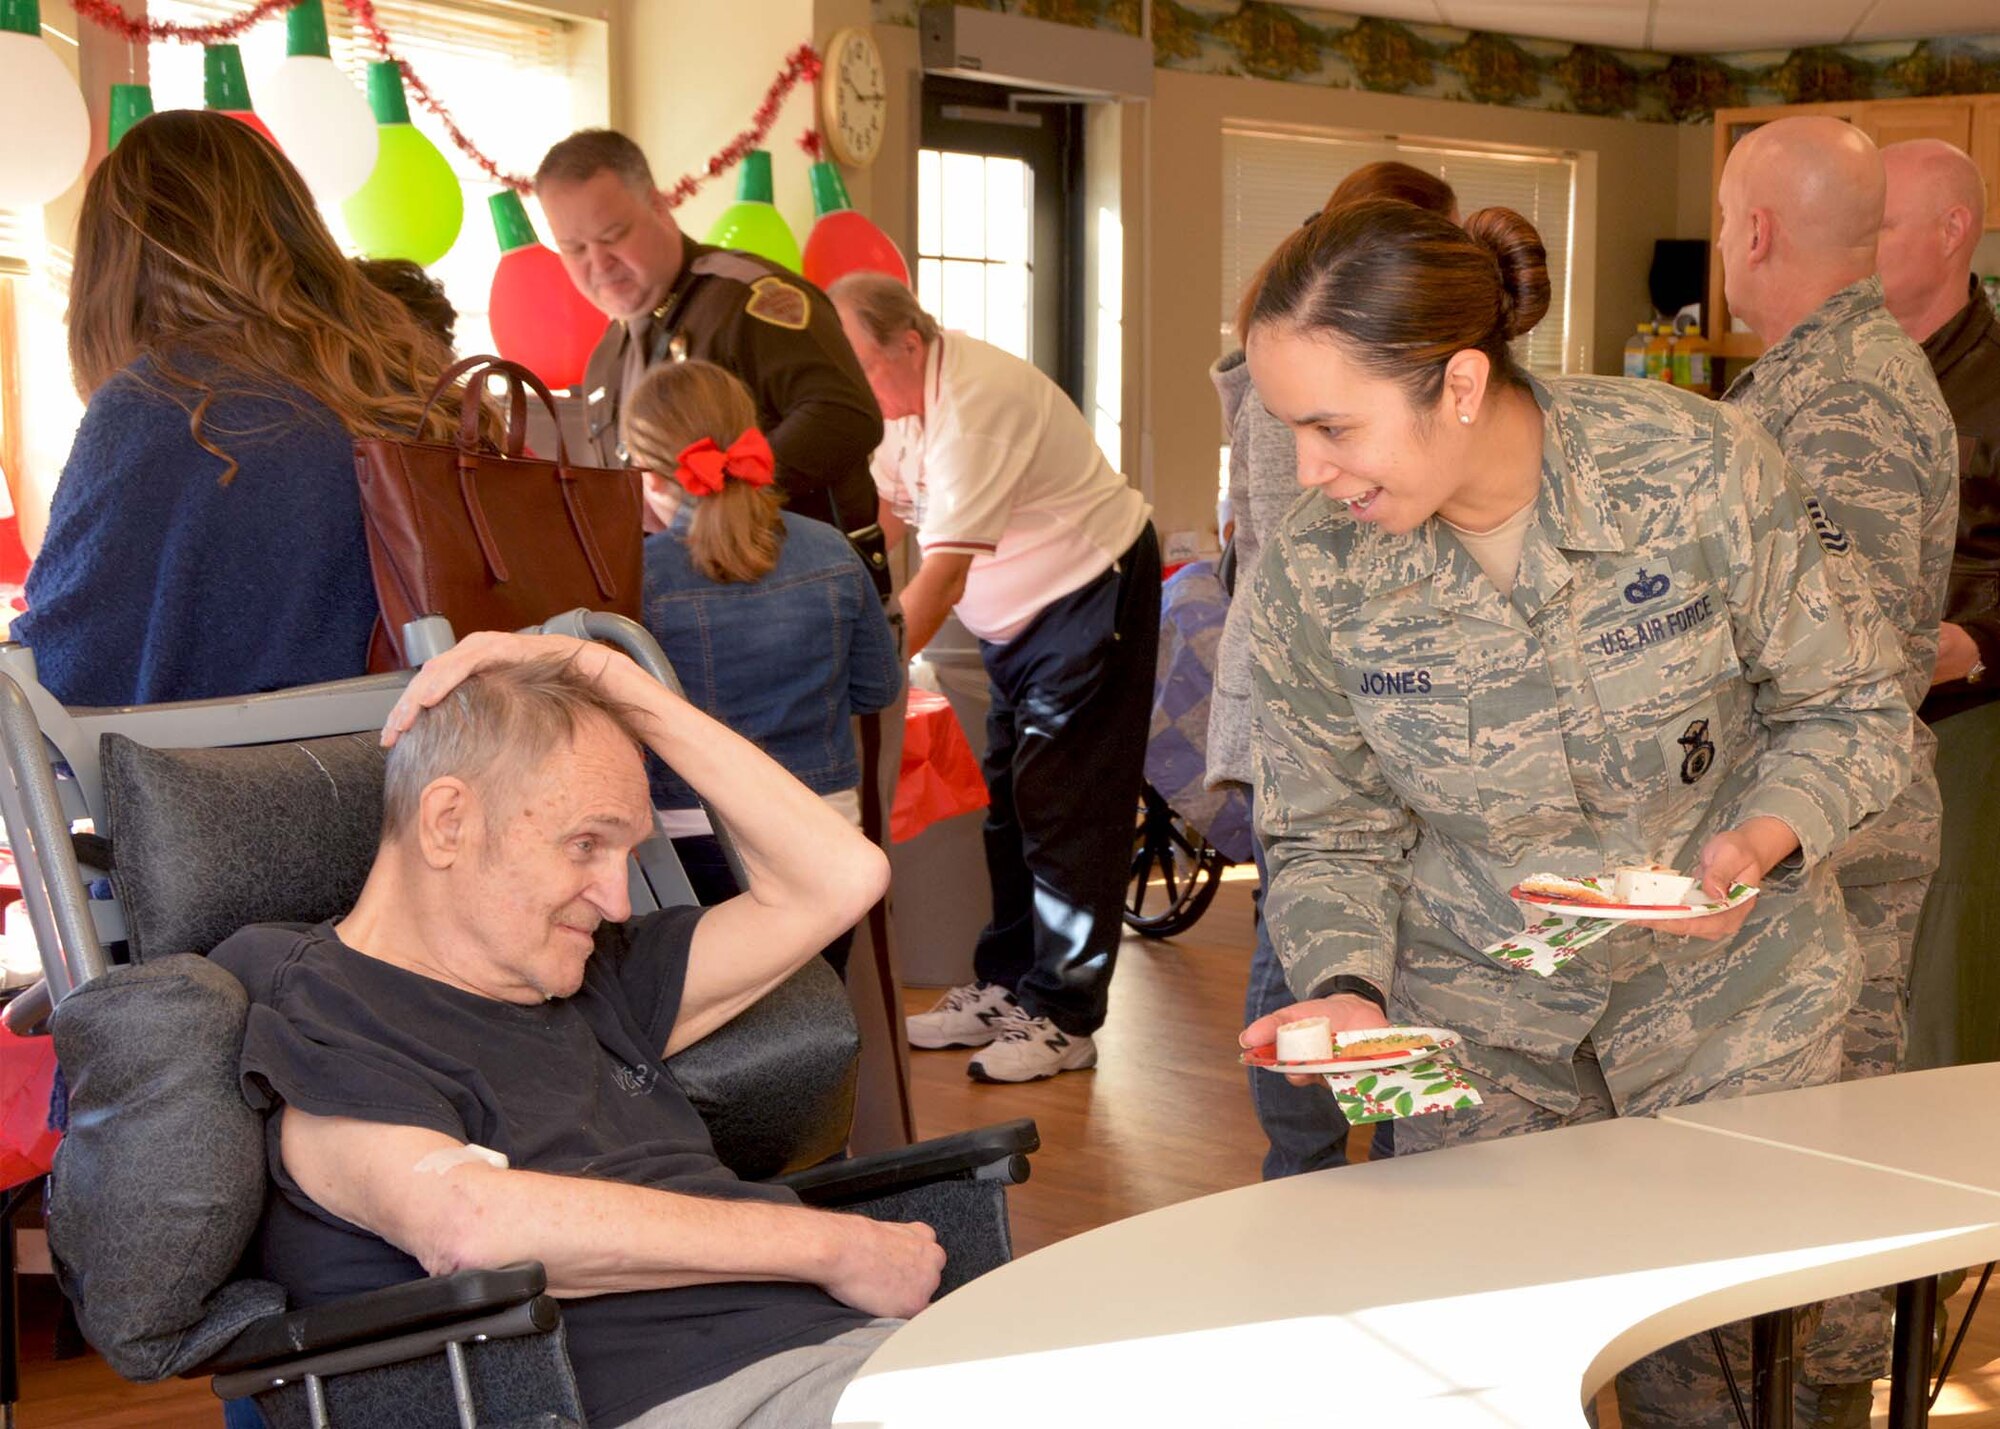 Tech. Sgt. Kathelene Jones, 507th Security Forces Squadron, serves a snack to a veteran Dec. 20, 2018, at the Norman Veterans Center in Norman, Oklahoma. 507th Air Refueling Wing Airmen visited the veterans to deliver gifts and serve snacks for the holidays. (U.S. Air Force photo by Tech. Sgt. Samantha Mathison)